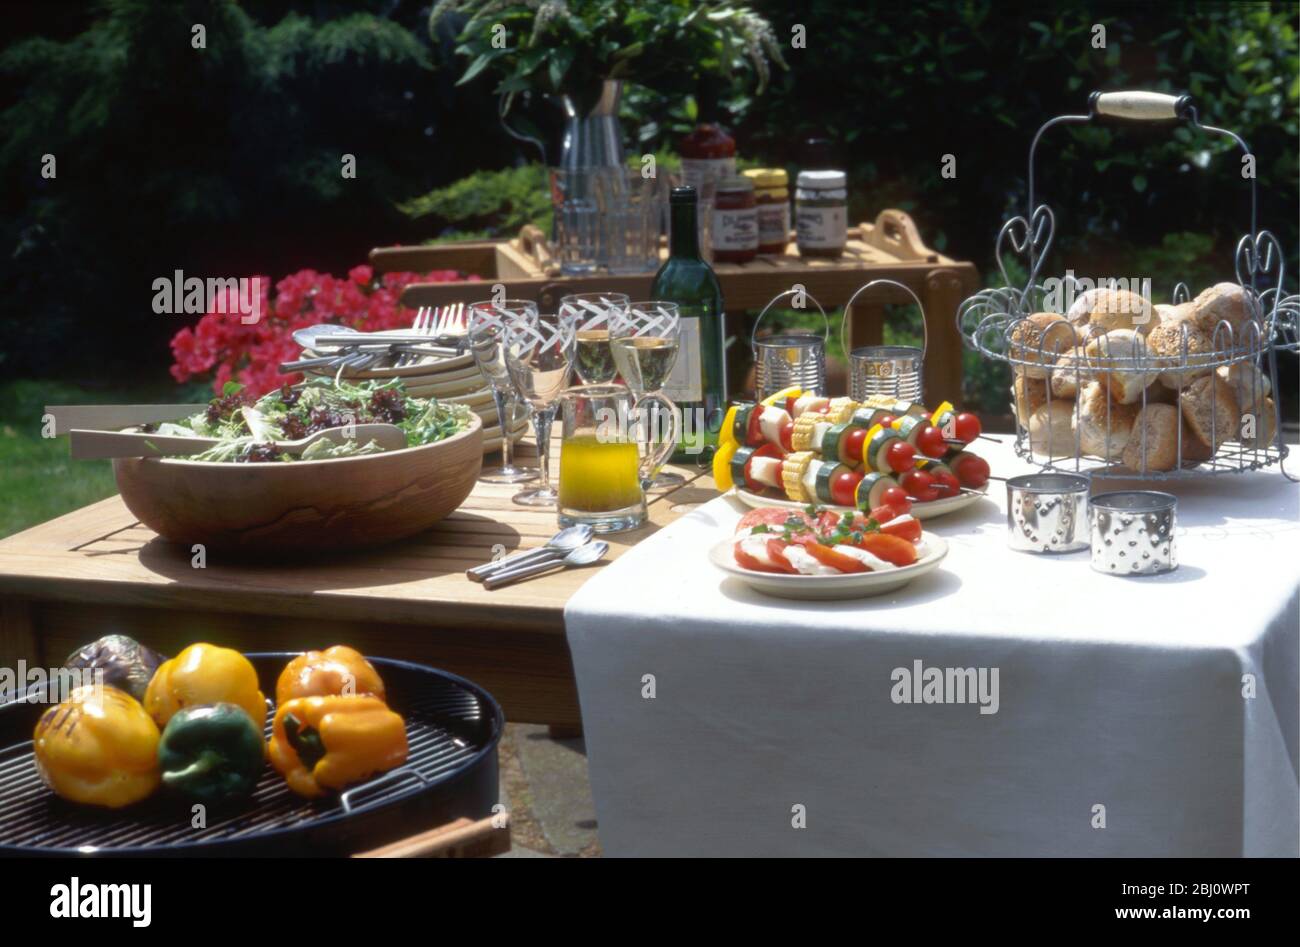 Smart barbecue lunch table outside in sunshine, salad in large wooden bowl, tomato and mozzarella salad, vegetable kebabs, olive oil dressing, bread r Stock Photo